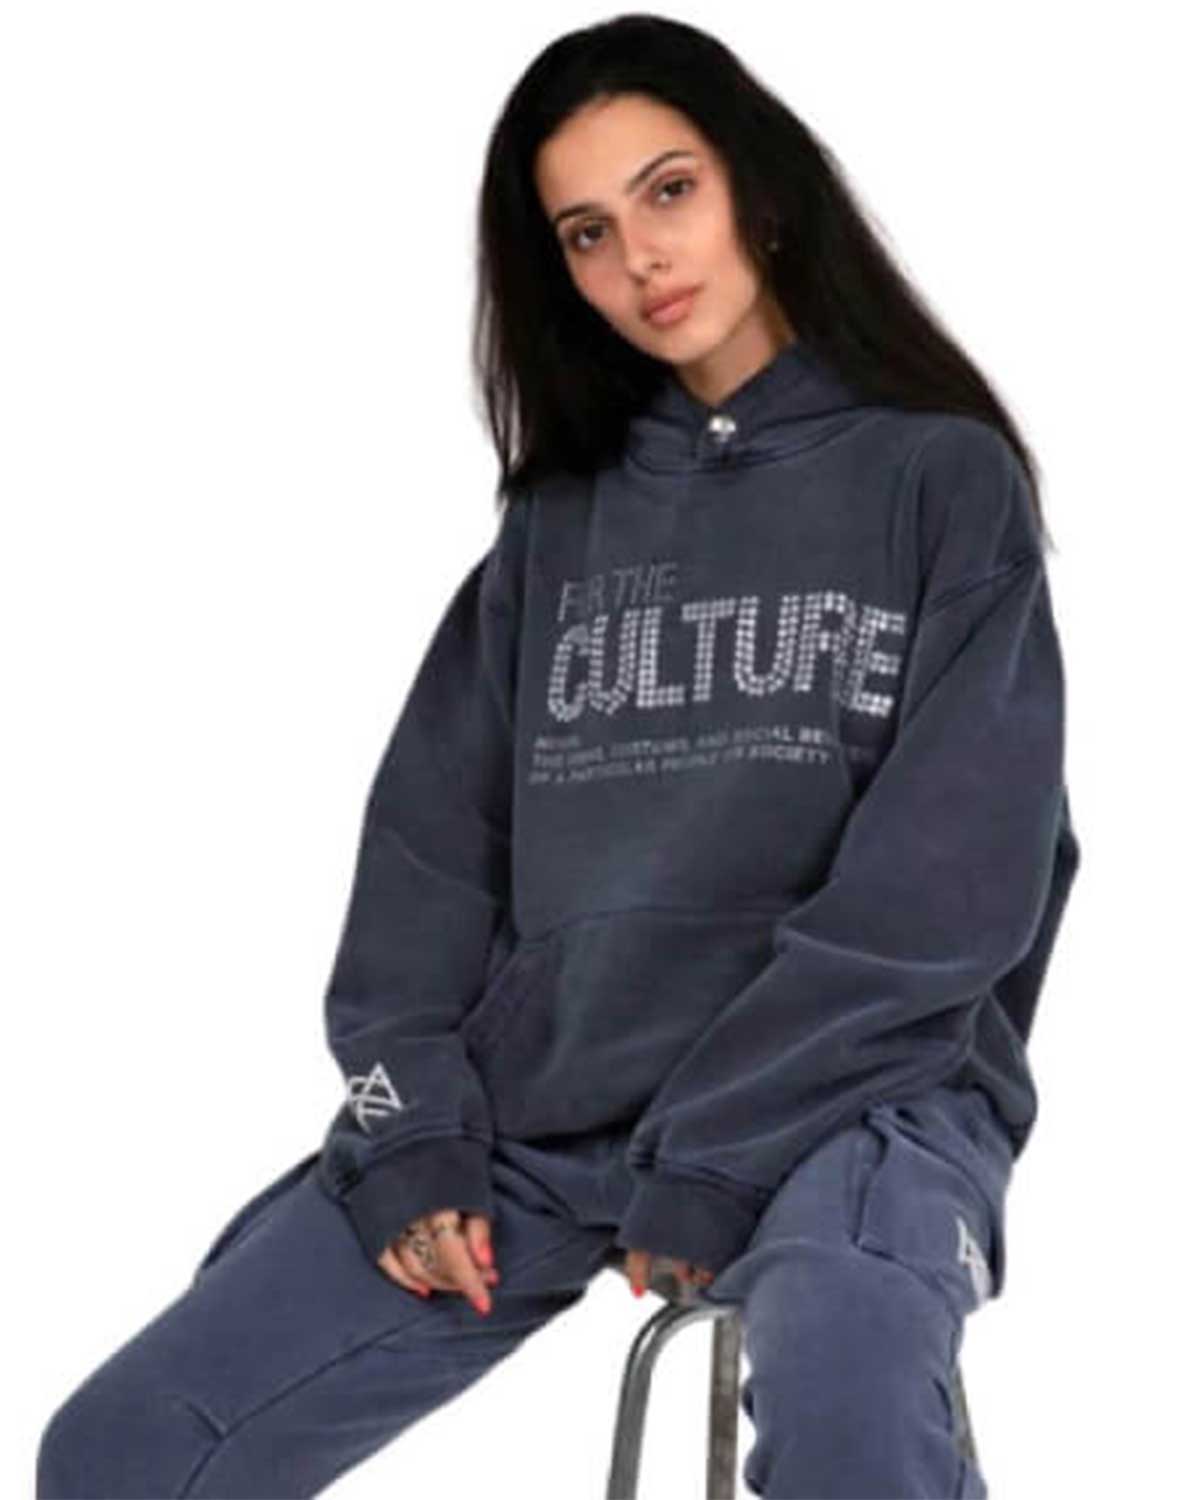 Elite For The Culture Crystal Hoodie